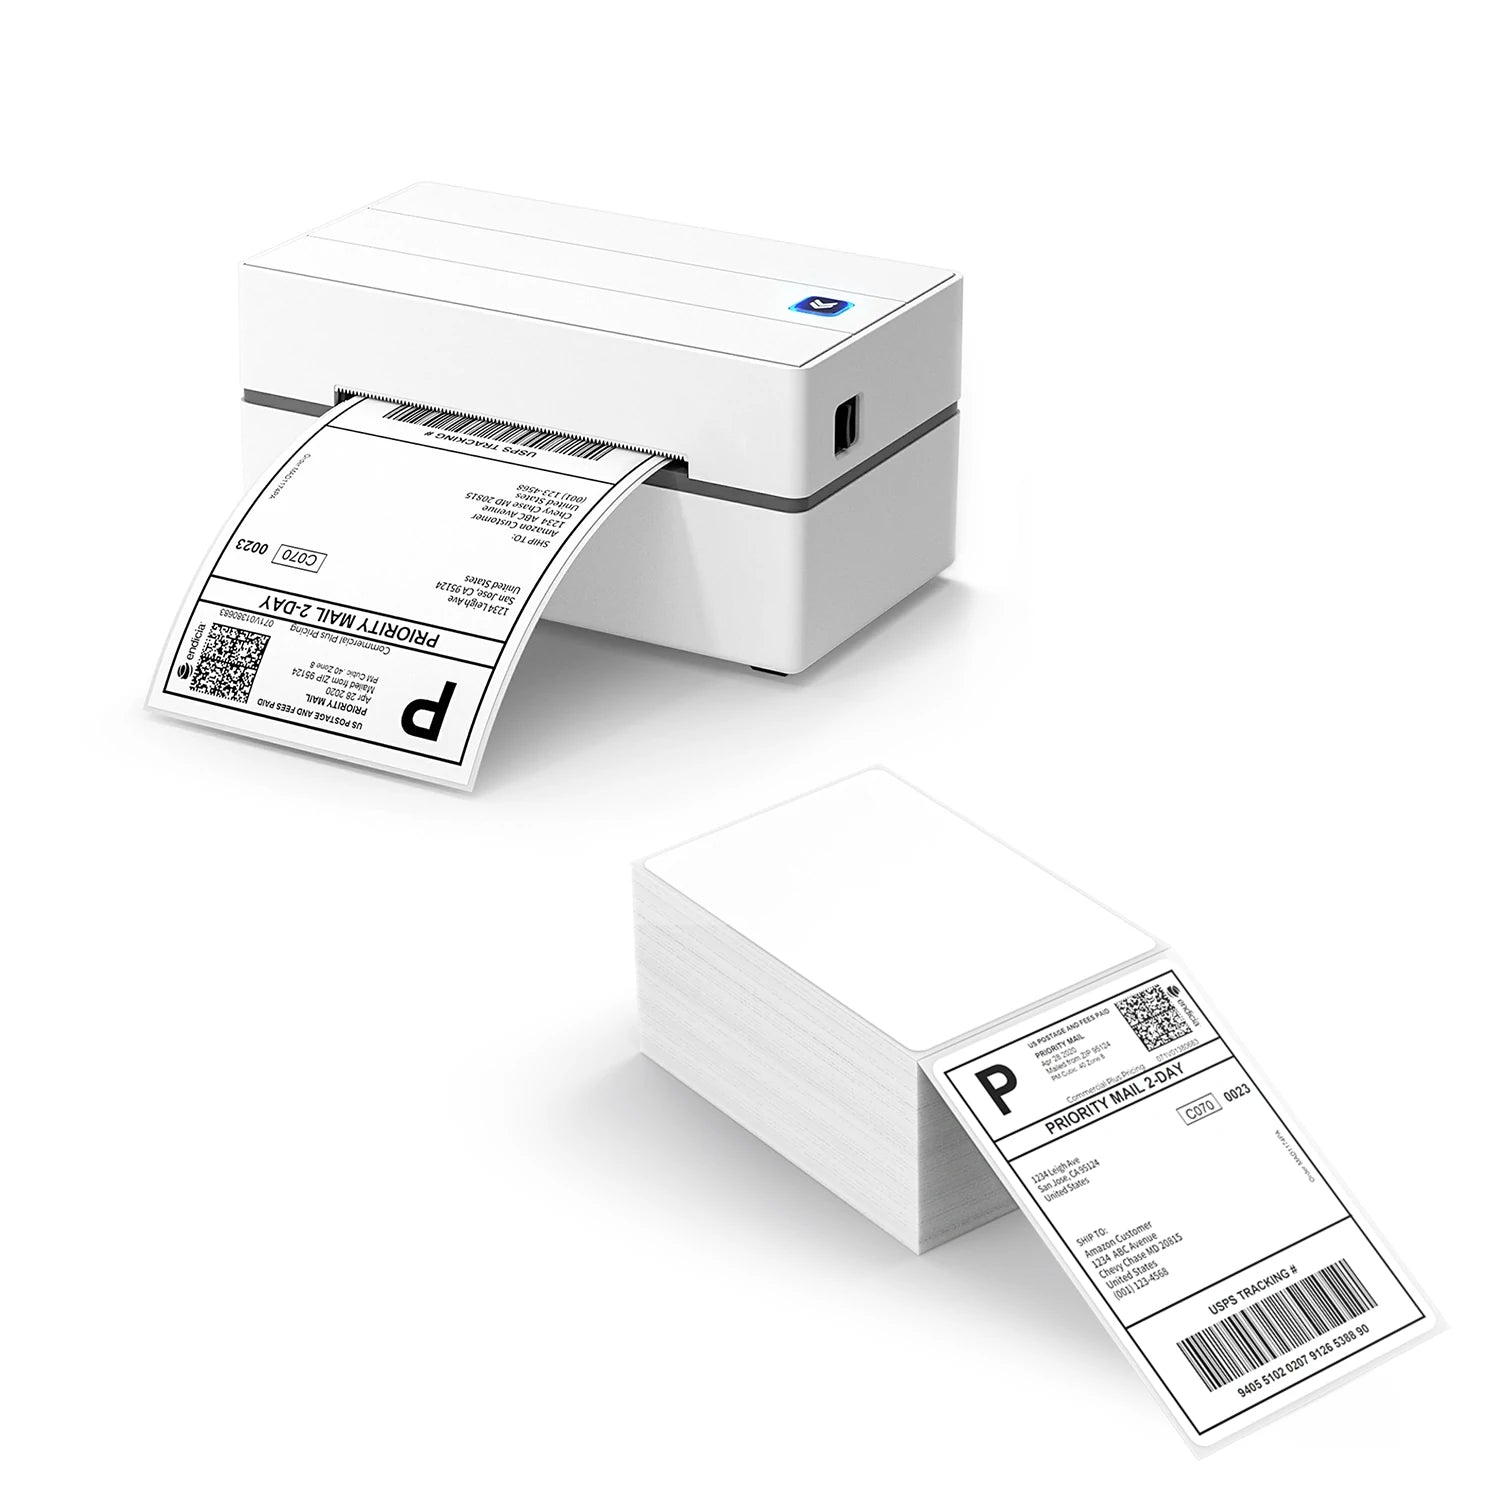 Can I Use Normal Paper on a Thermal Printer